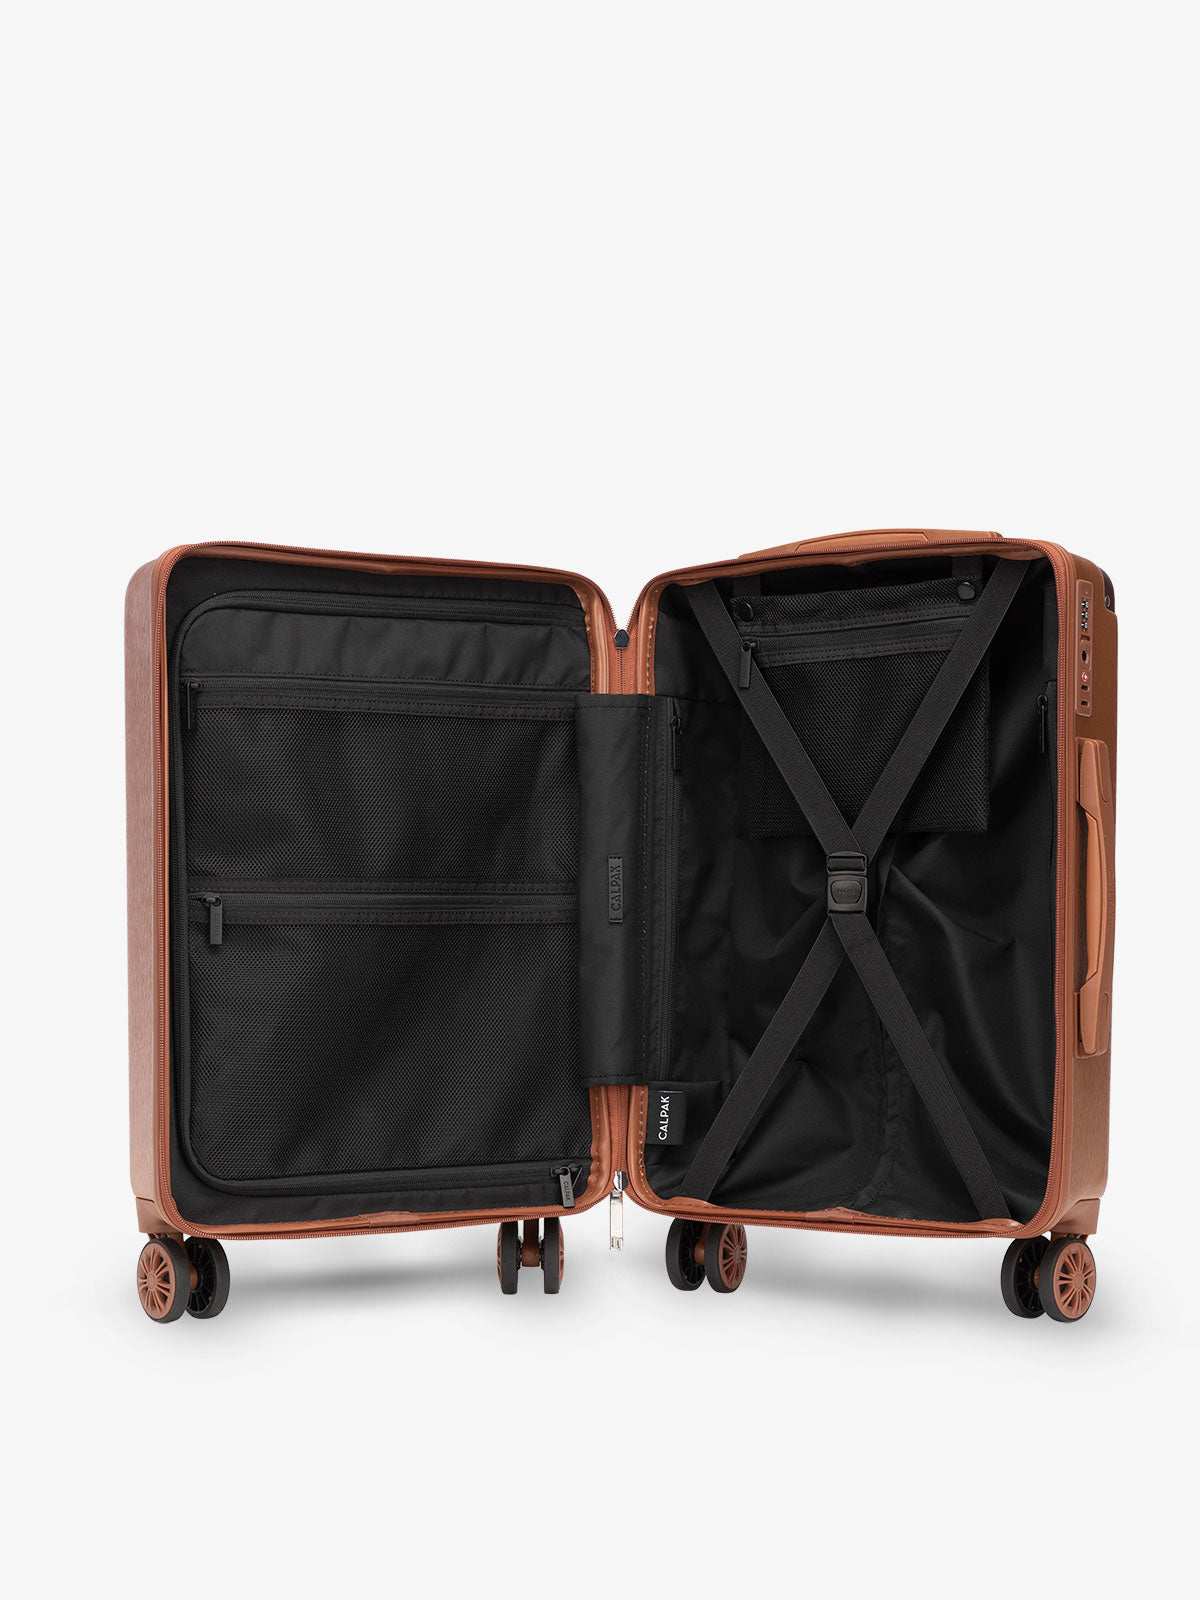 CALPAK Ambeur large 30 inch luggage with interior compression straps and multiple pockets in copper